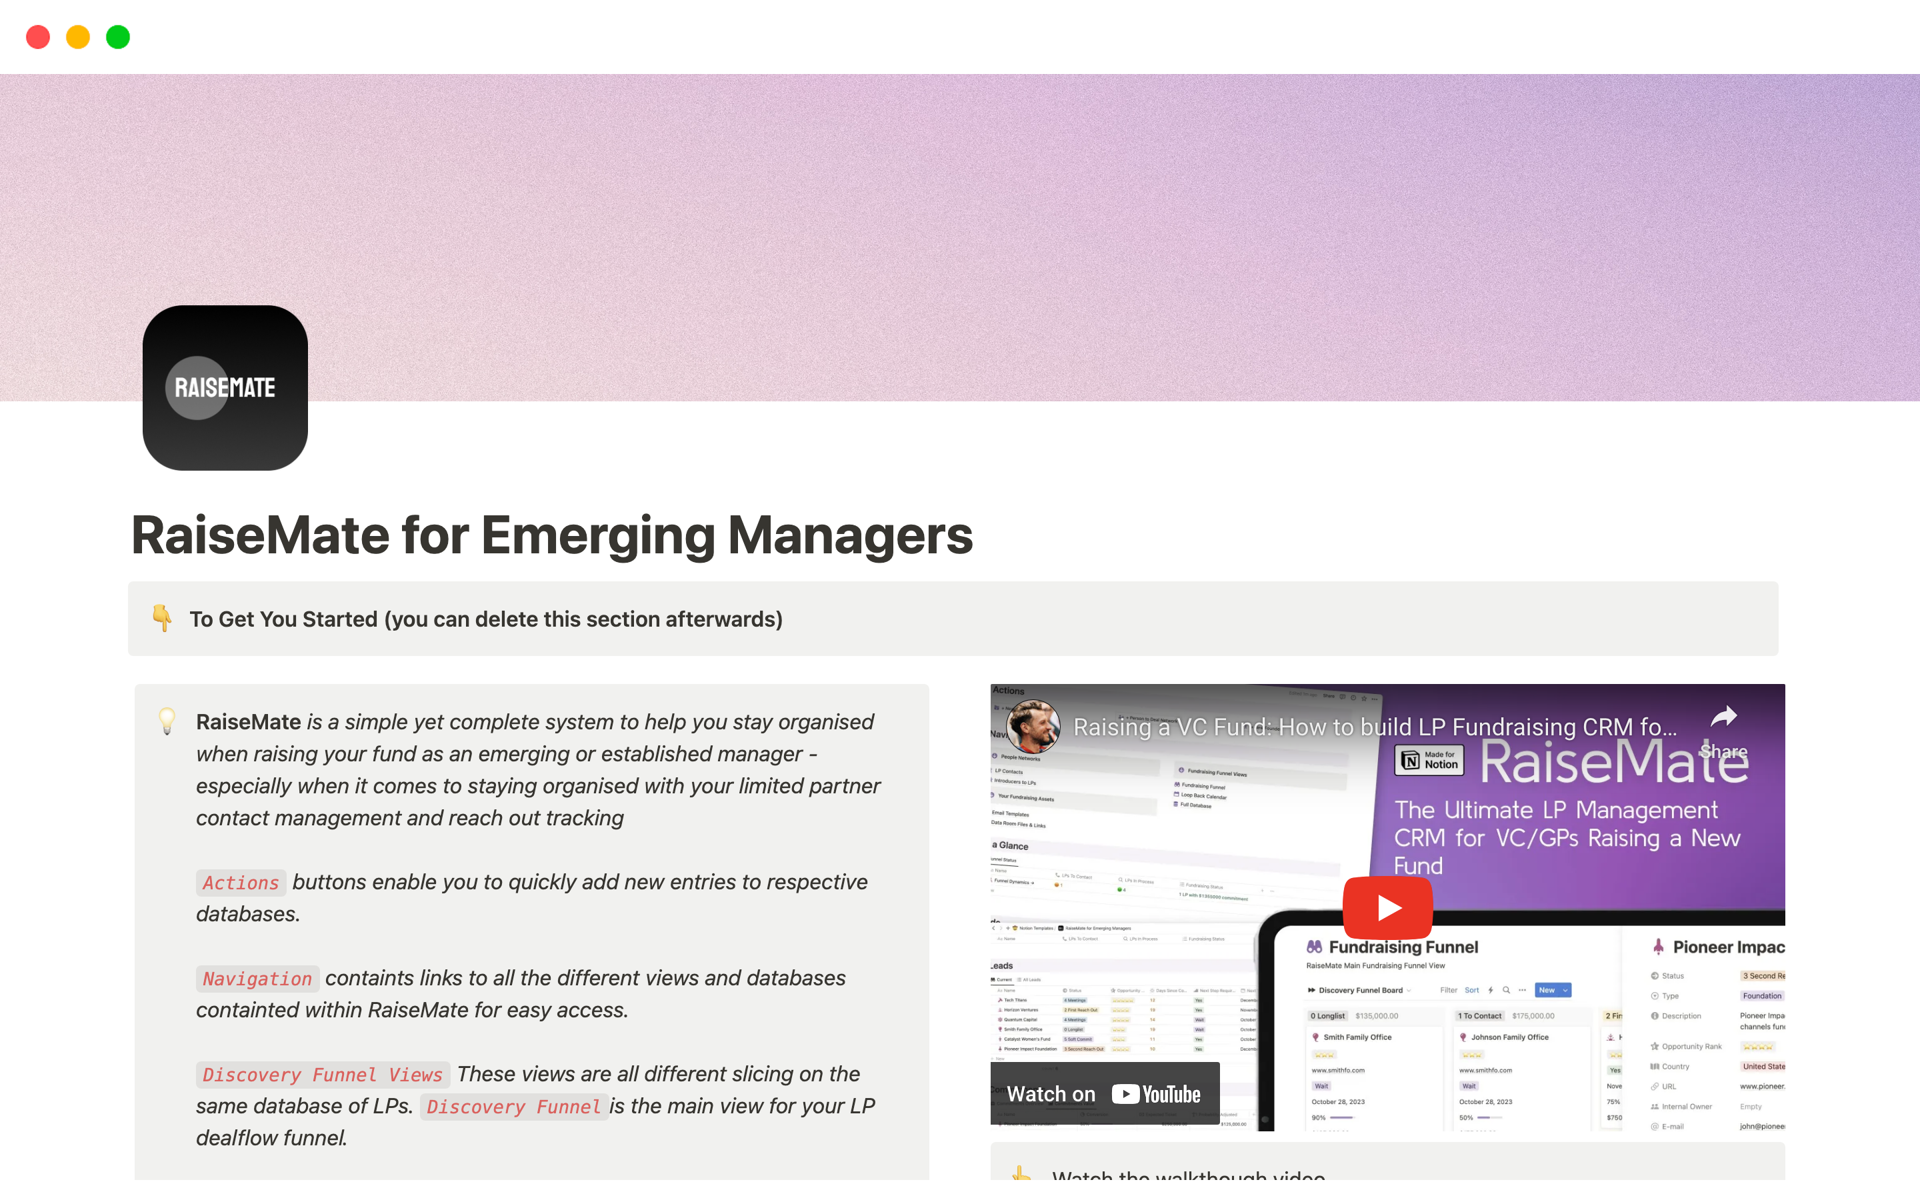 RaiseMate - Ultimate LP Management CRM for VC Managers to Raise a New Fund